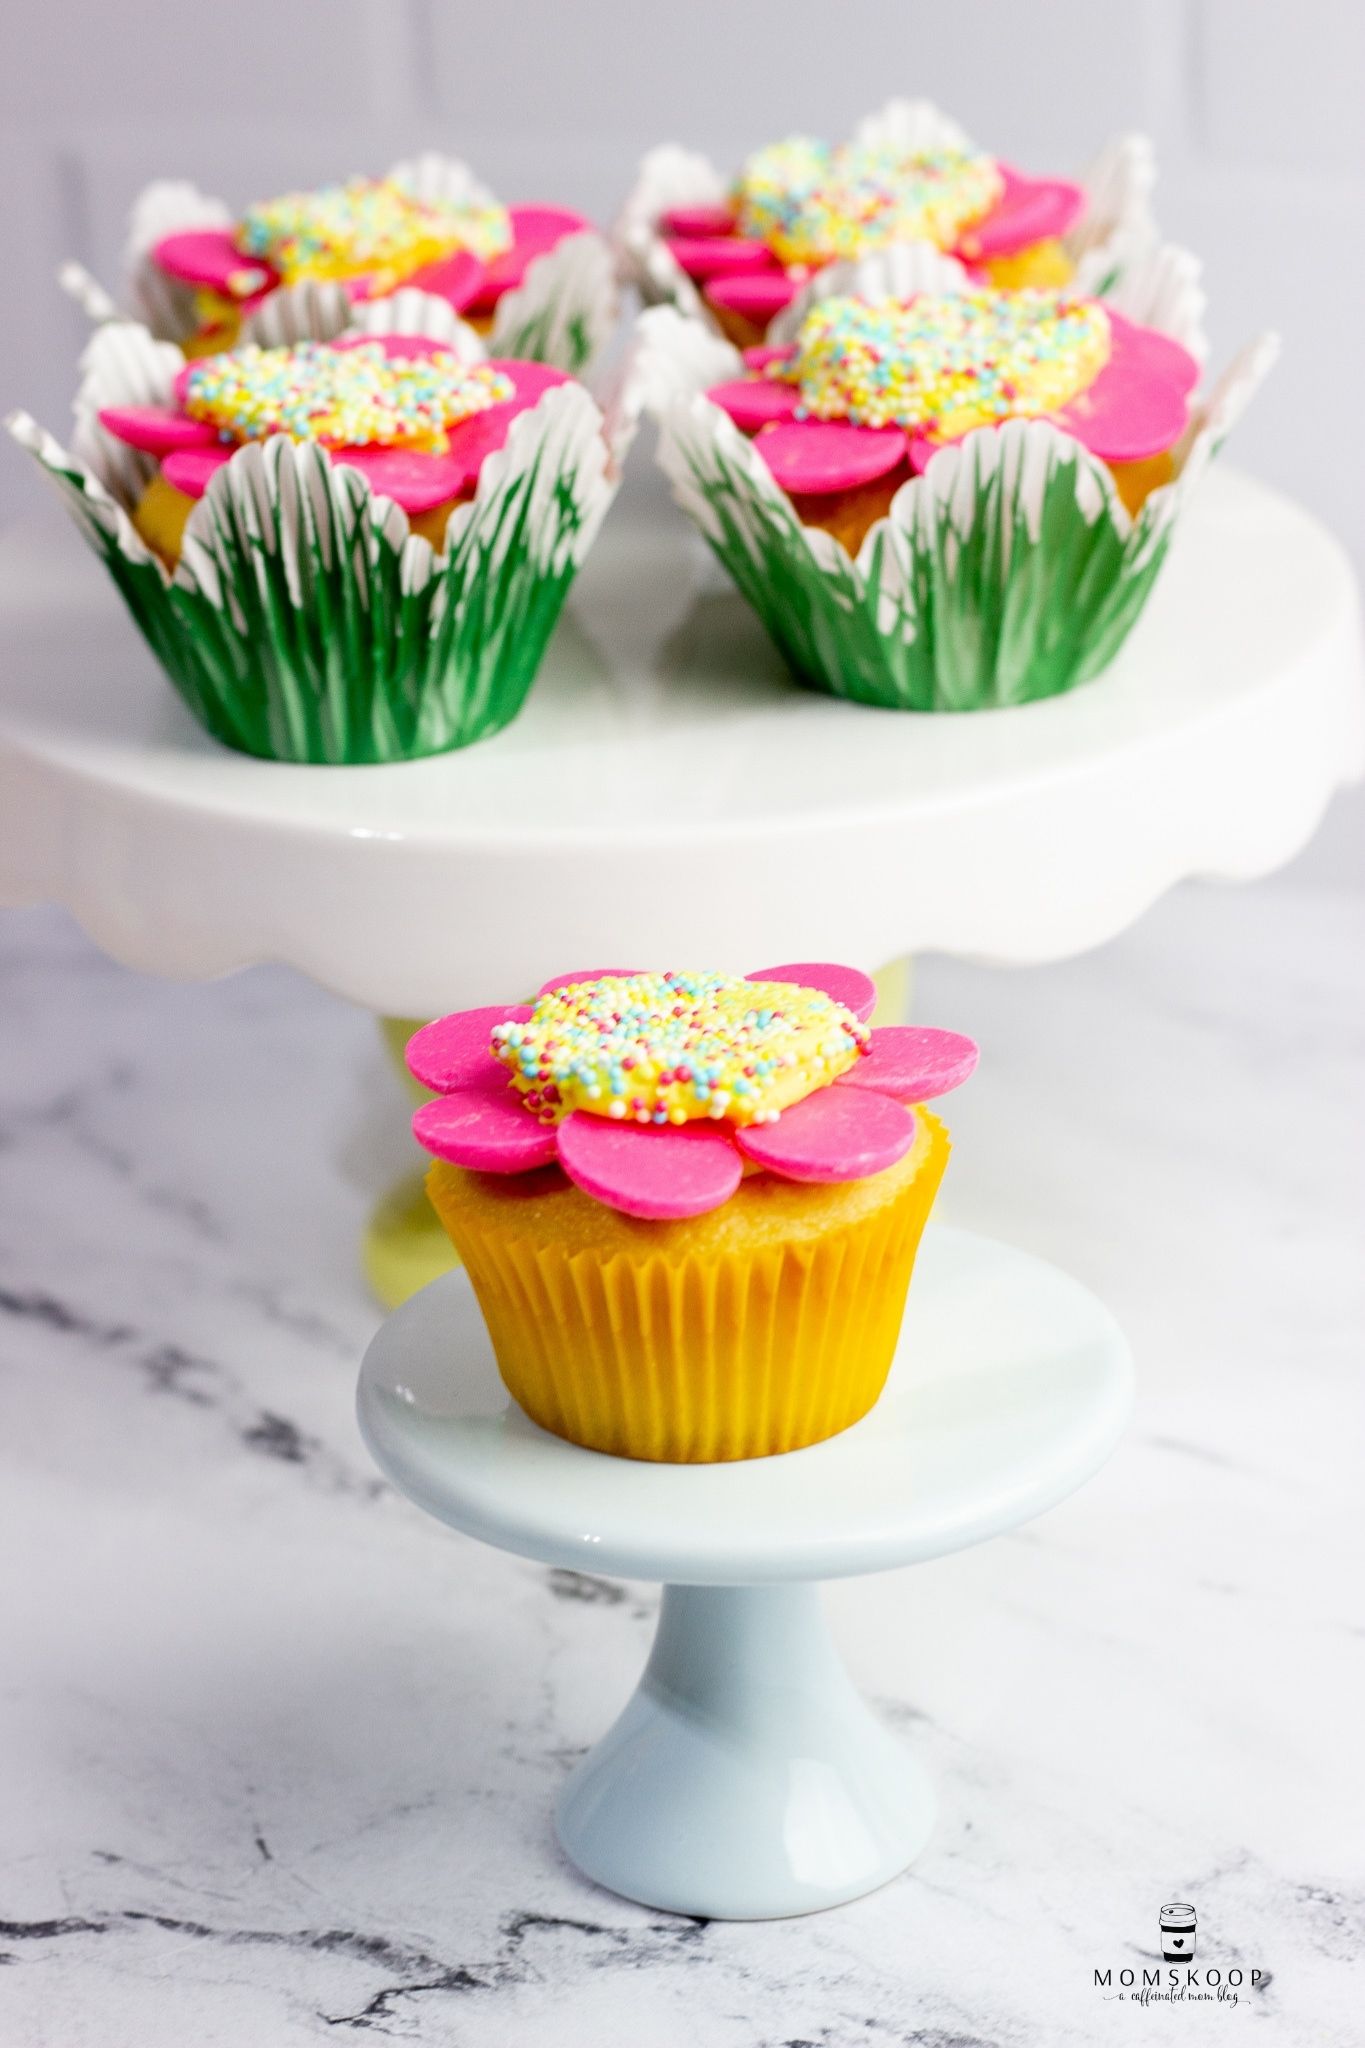 A Daisy cupcake on a light blue cake stand and four Spring cupcakes on a cake stand behind it